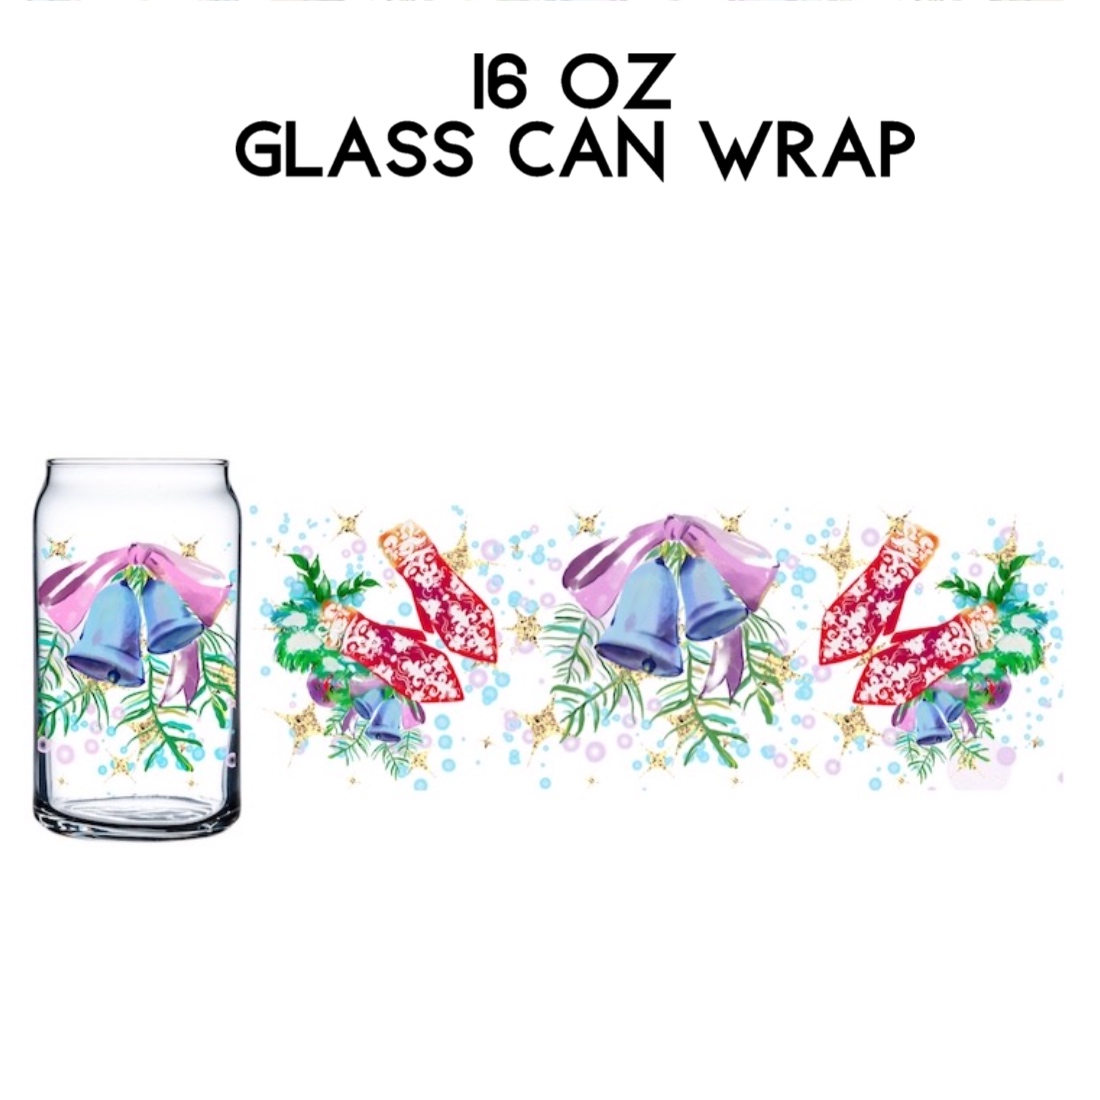 Glass Can Wrap Holiday Patterns Design preview image.